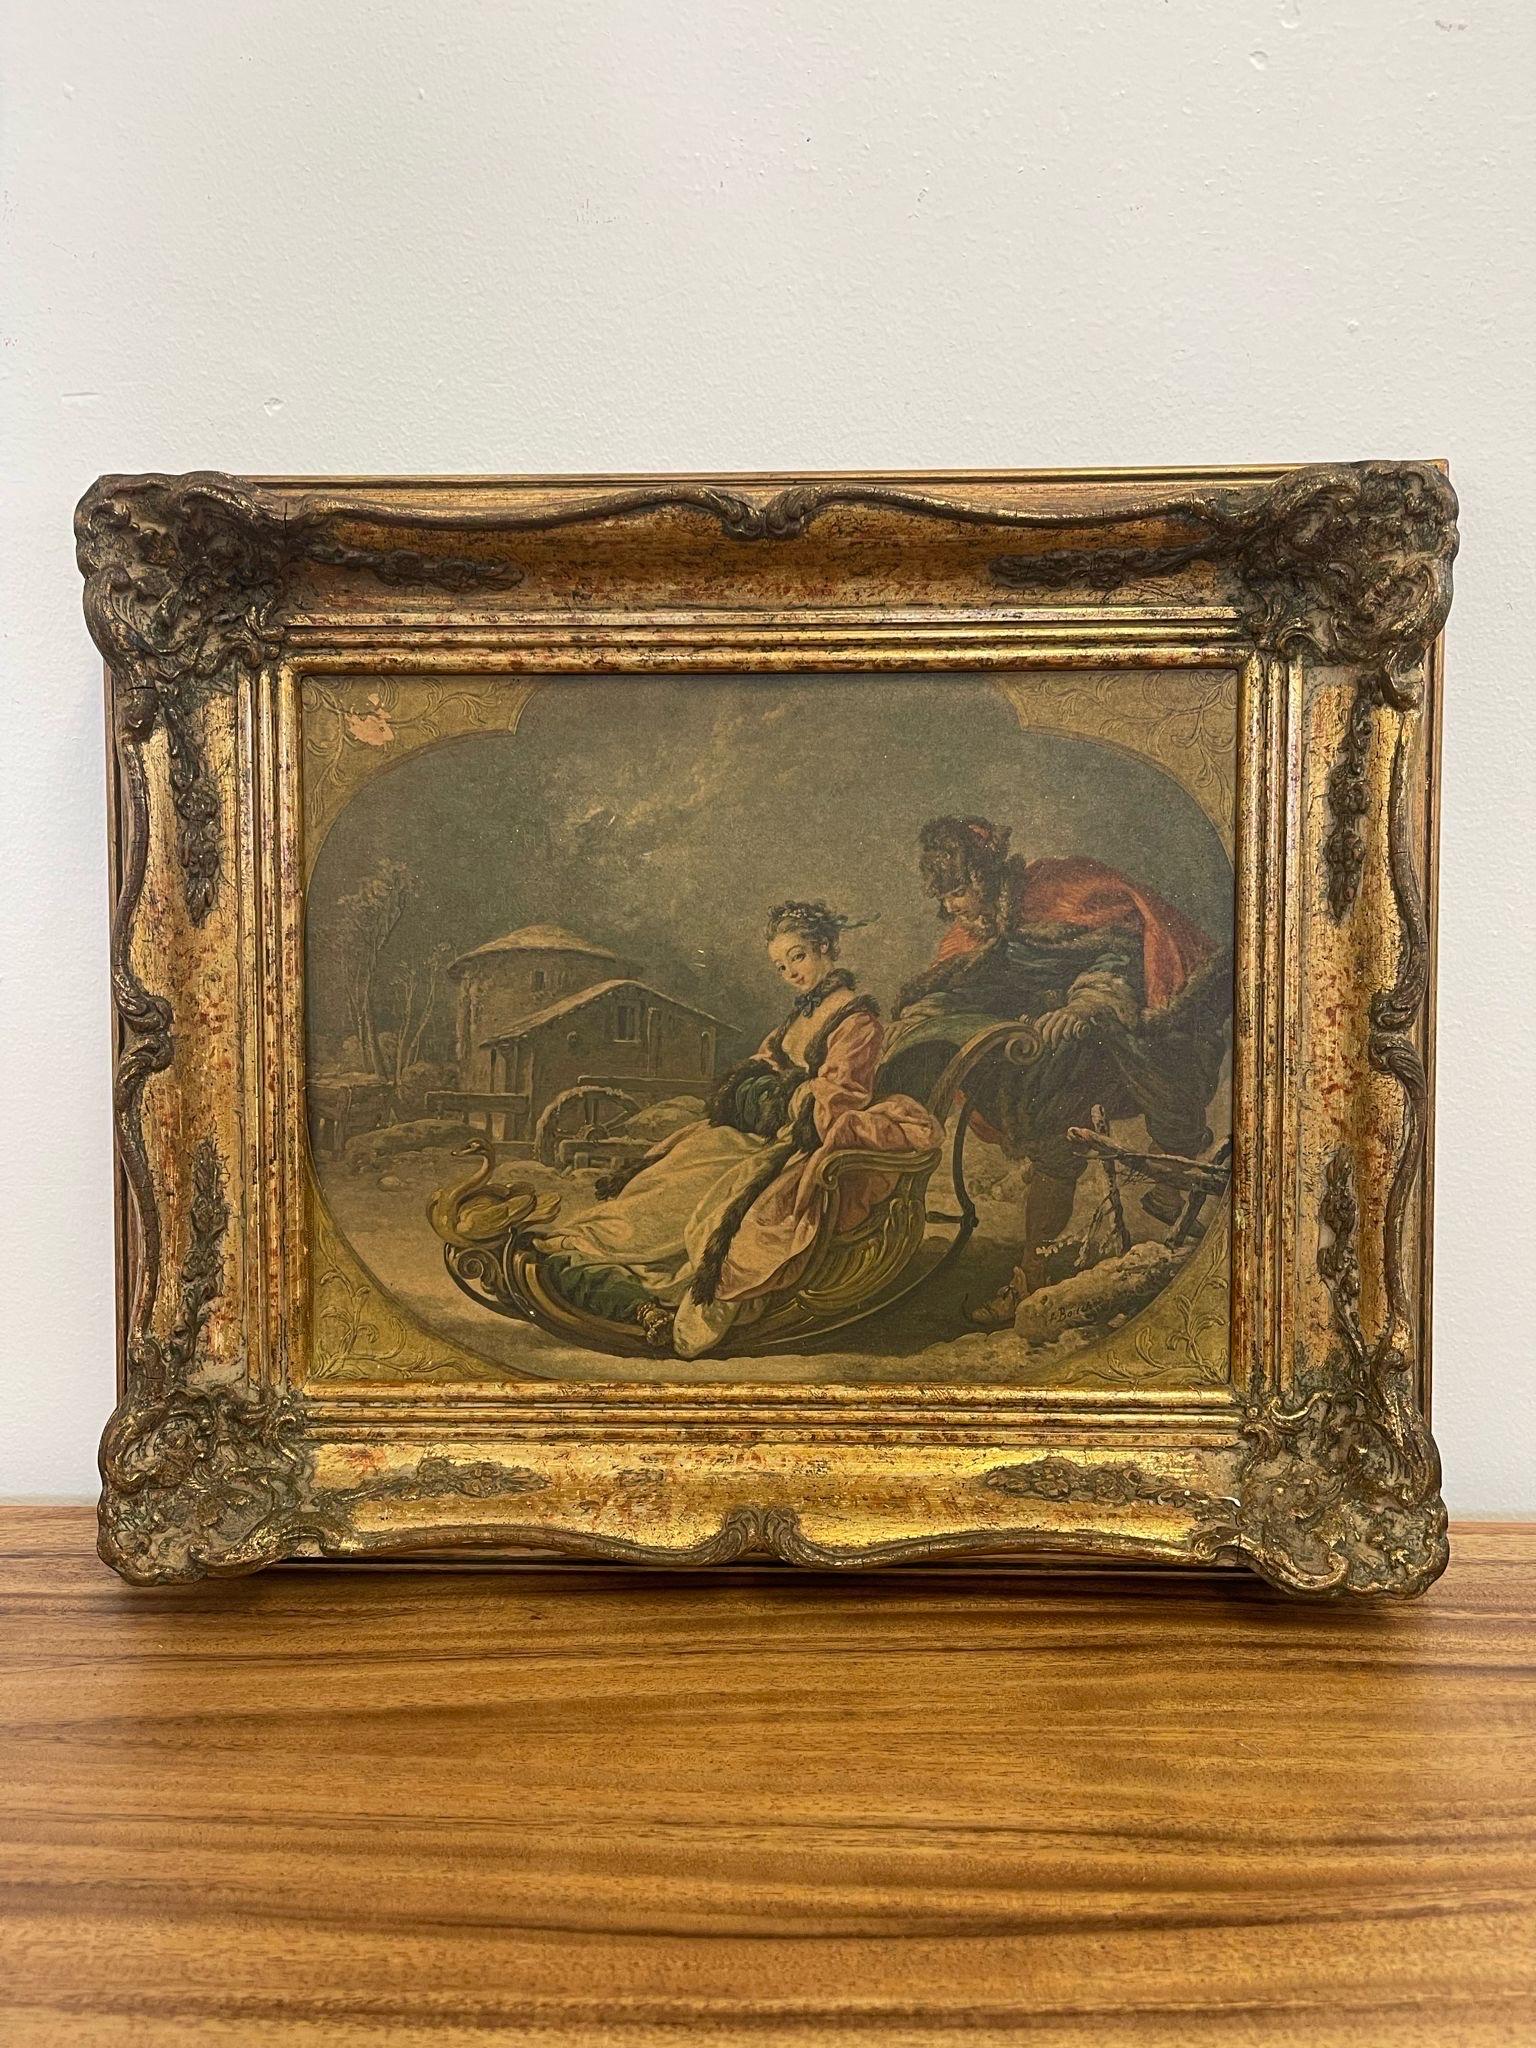 This Art piece has a beautiful Petina throughout due to aging. The print contains a couple sledding through Snow. Reproduction of an original work by Francois Boucher. Vintage Condition Consistent with Age as Pictured.

Dimensions. 16 W ; 1 D ; 19 H